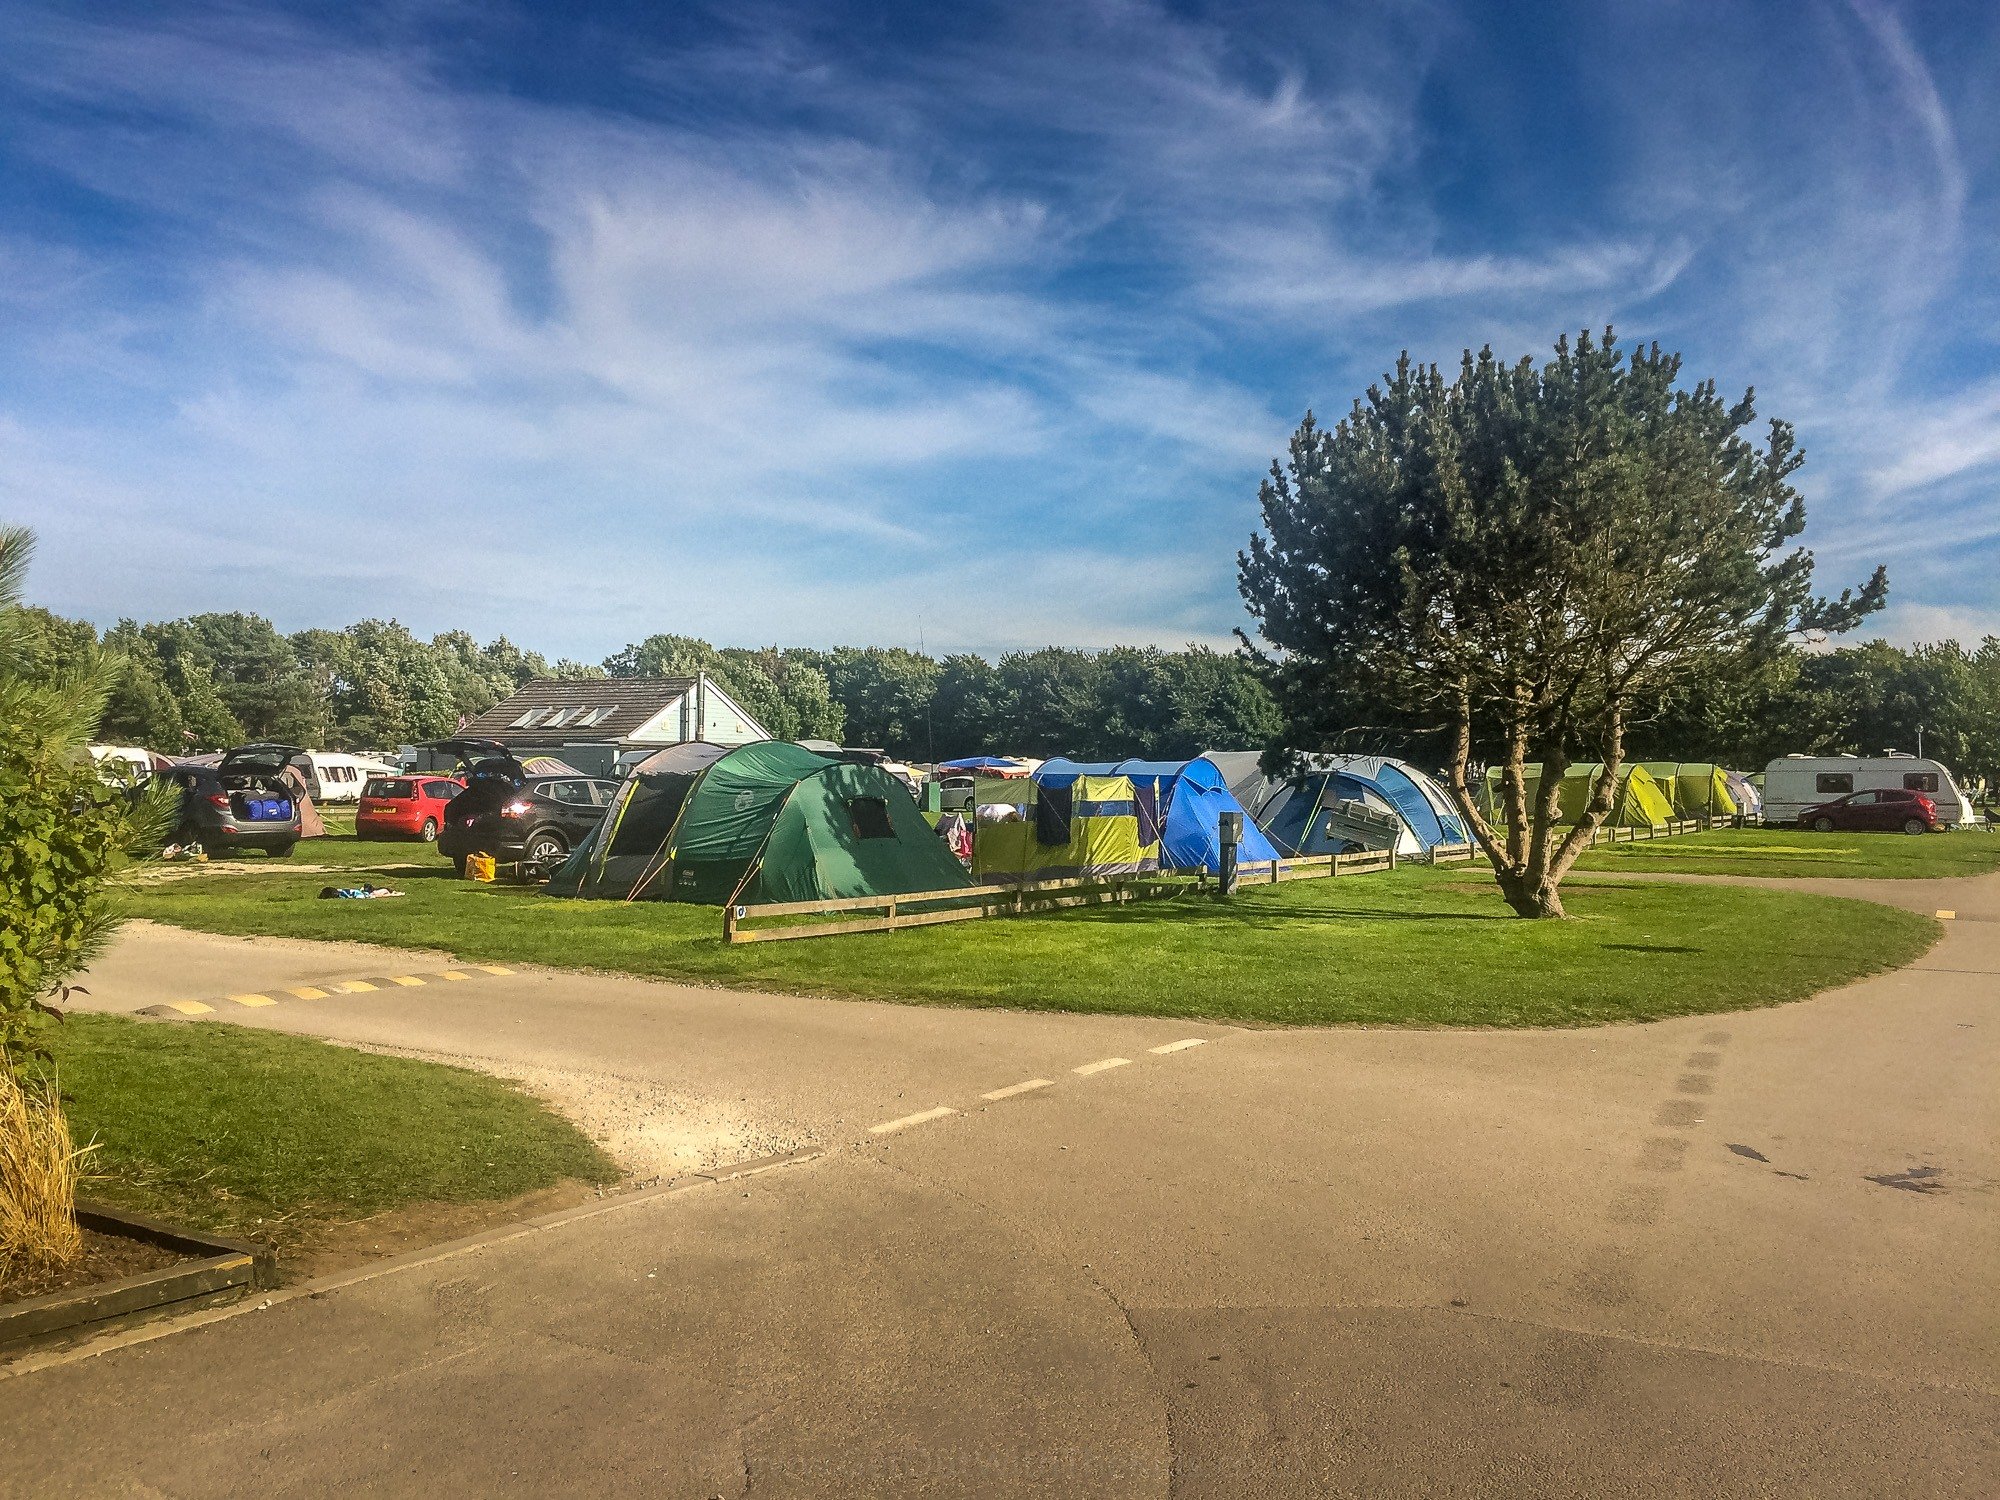  The main camping field